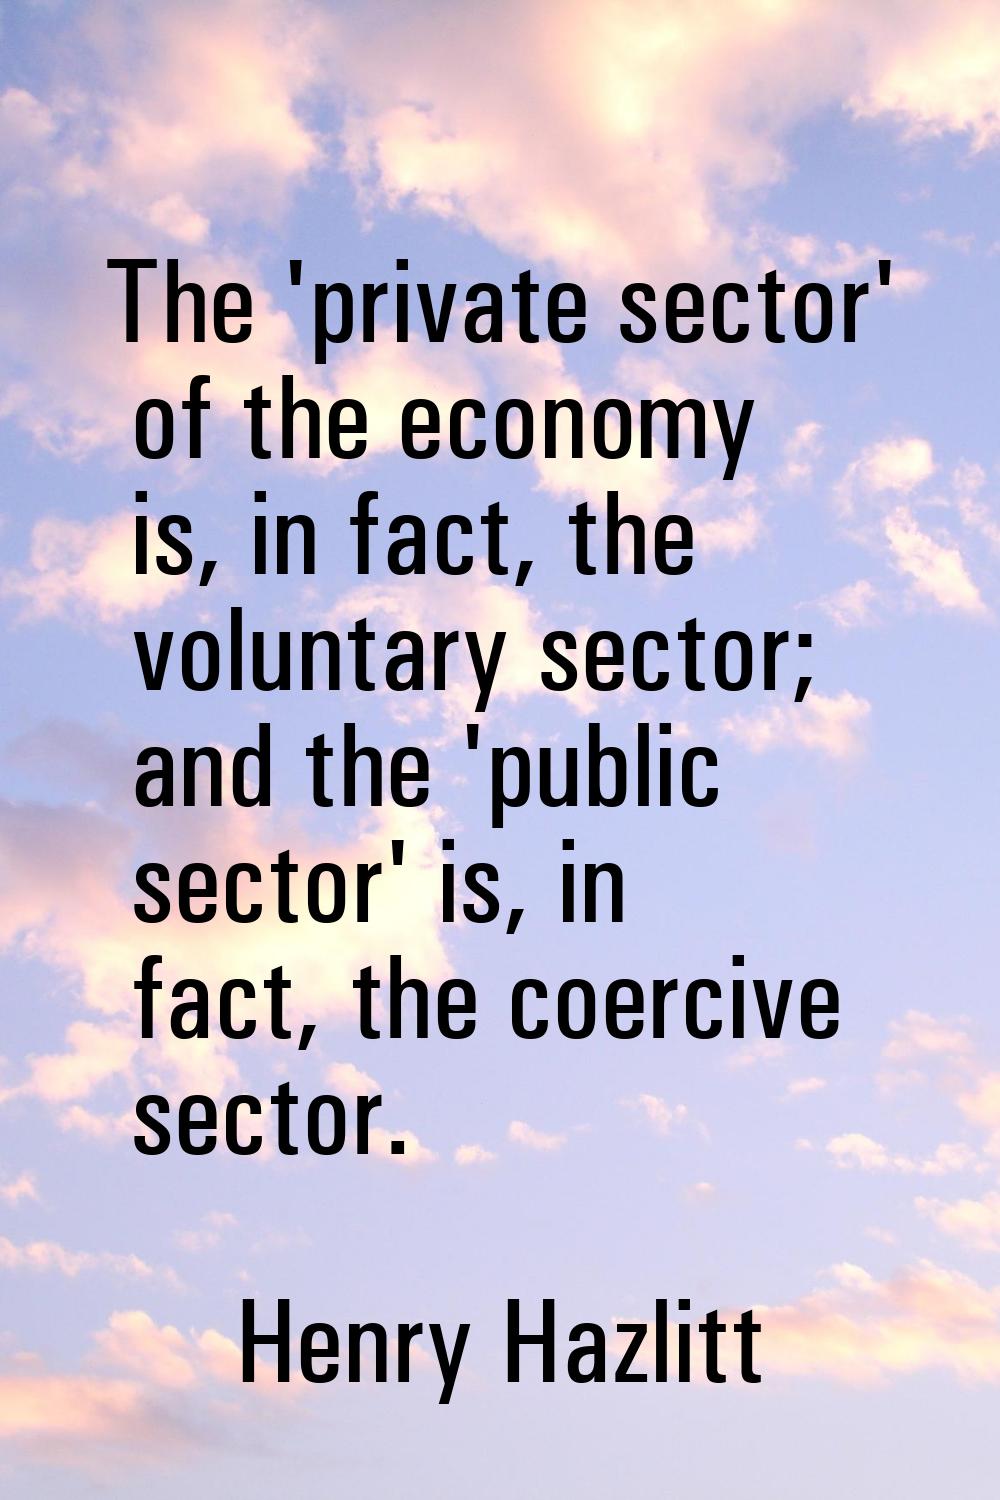 The 'private sector' of the economy is, in fact, the voluntary sector; and the 'public sector' is, 